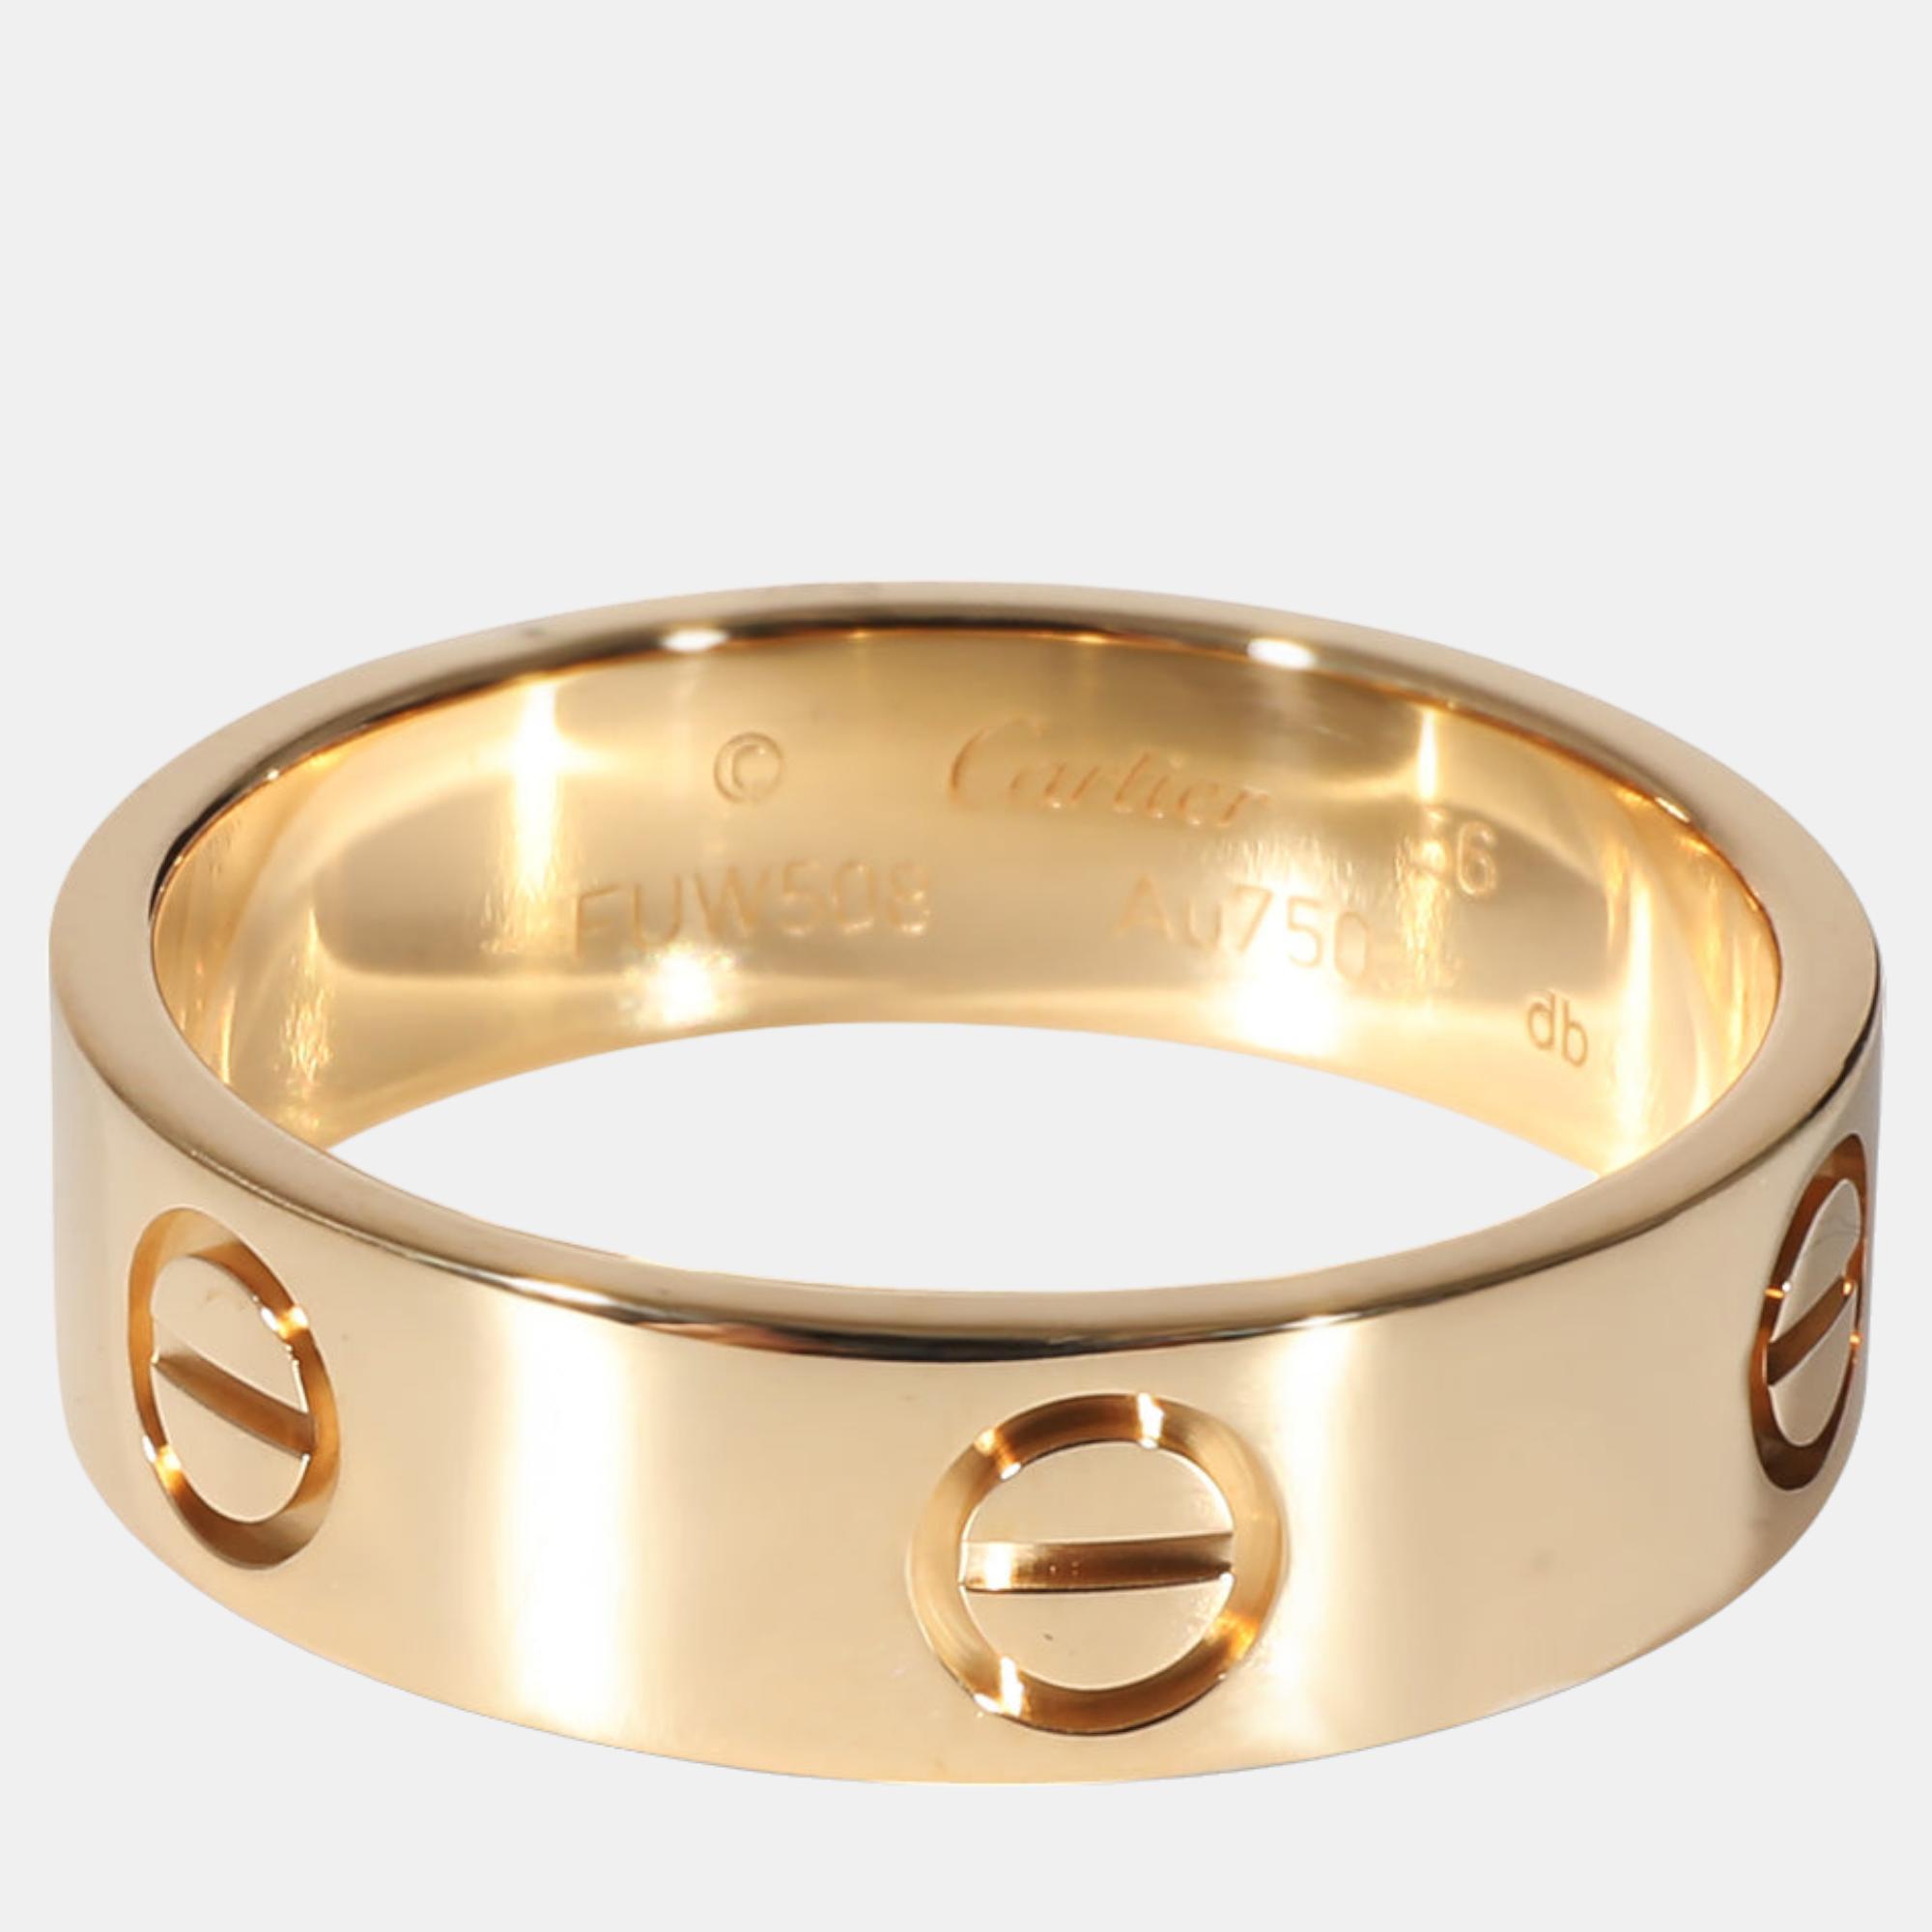 Cartier Love Ring In 18k Yellow Gold